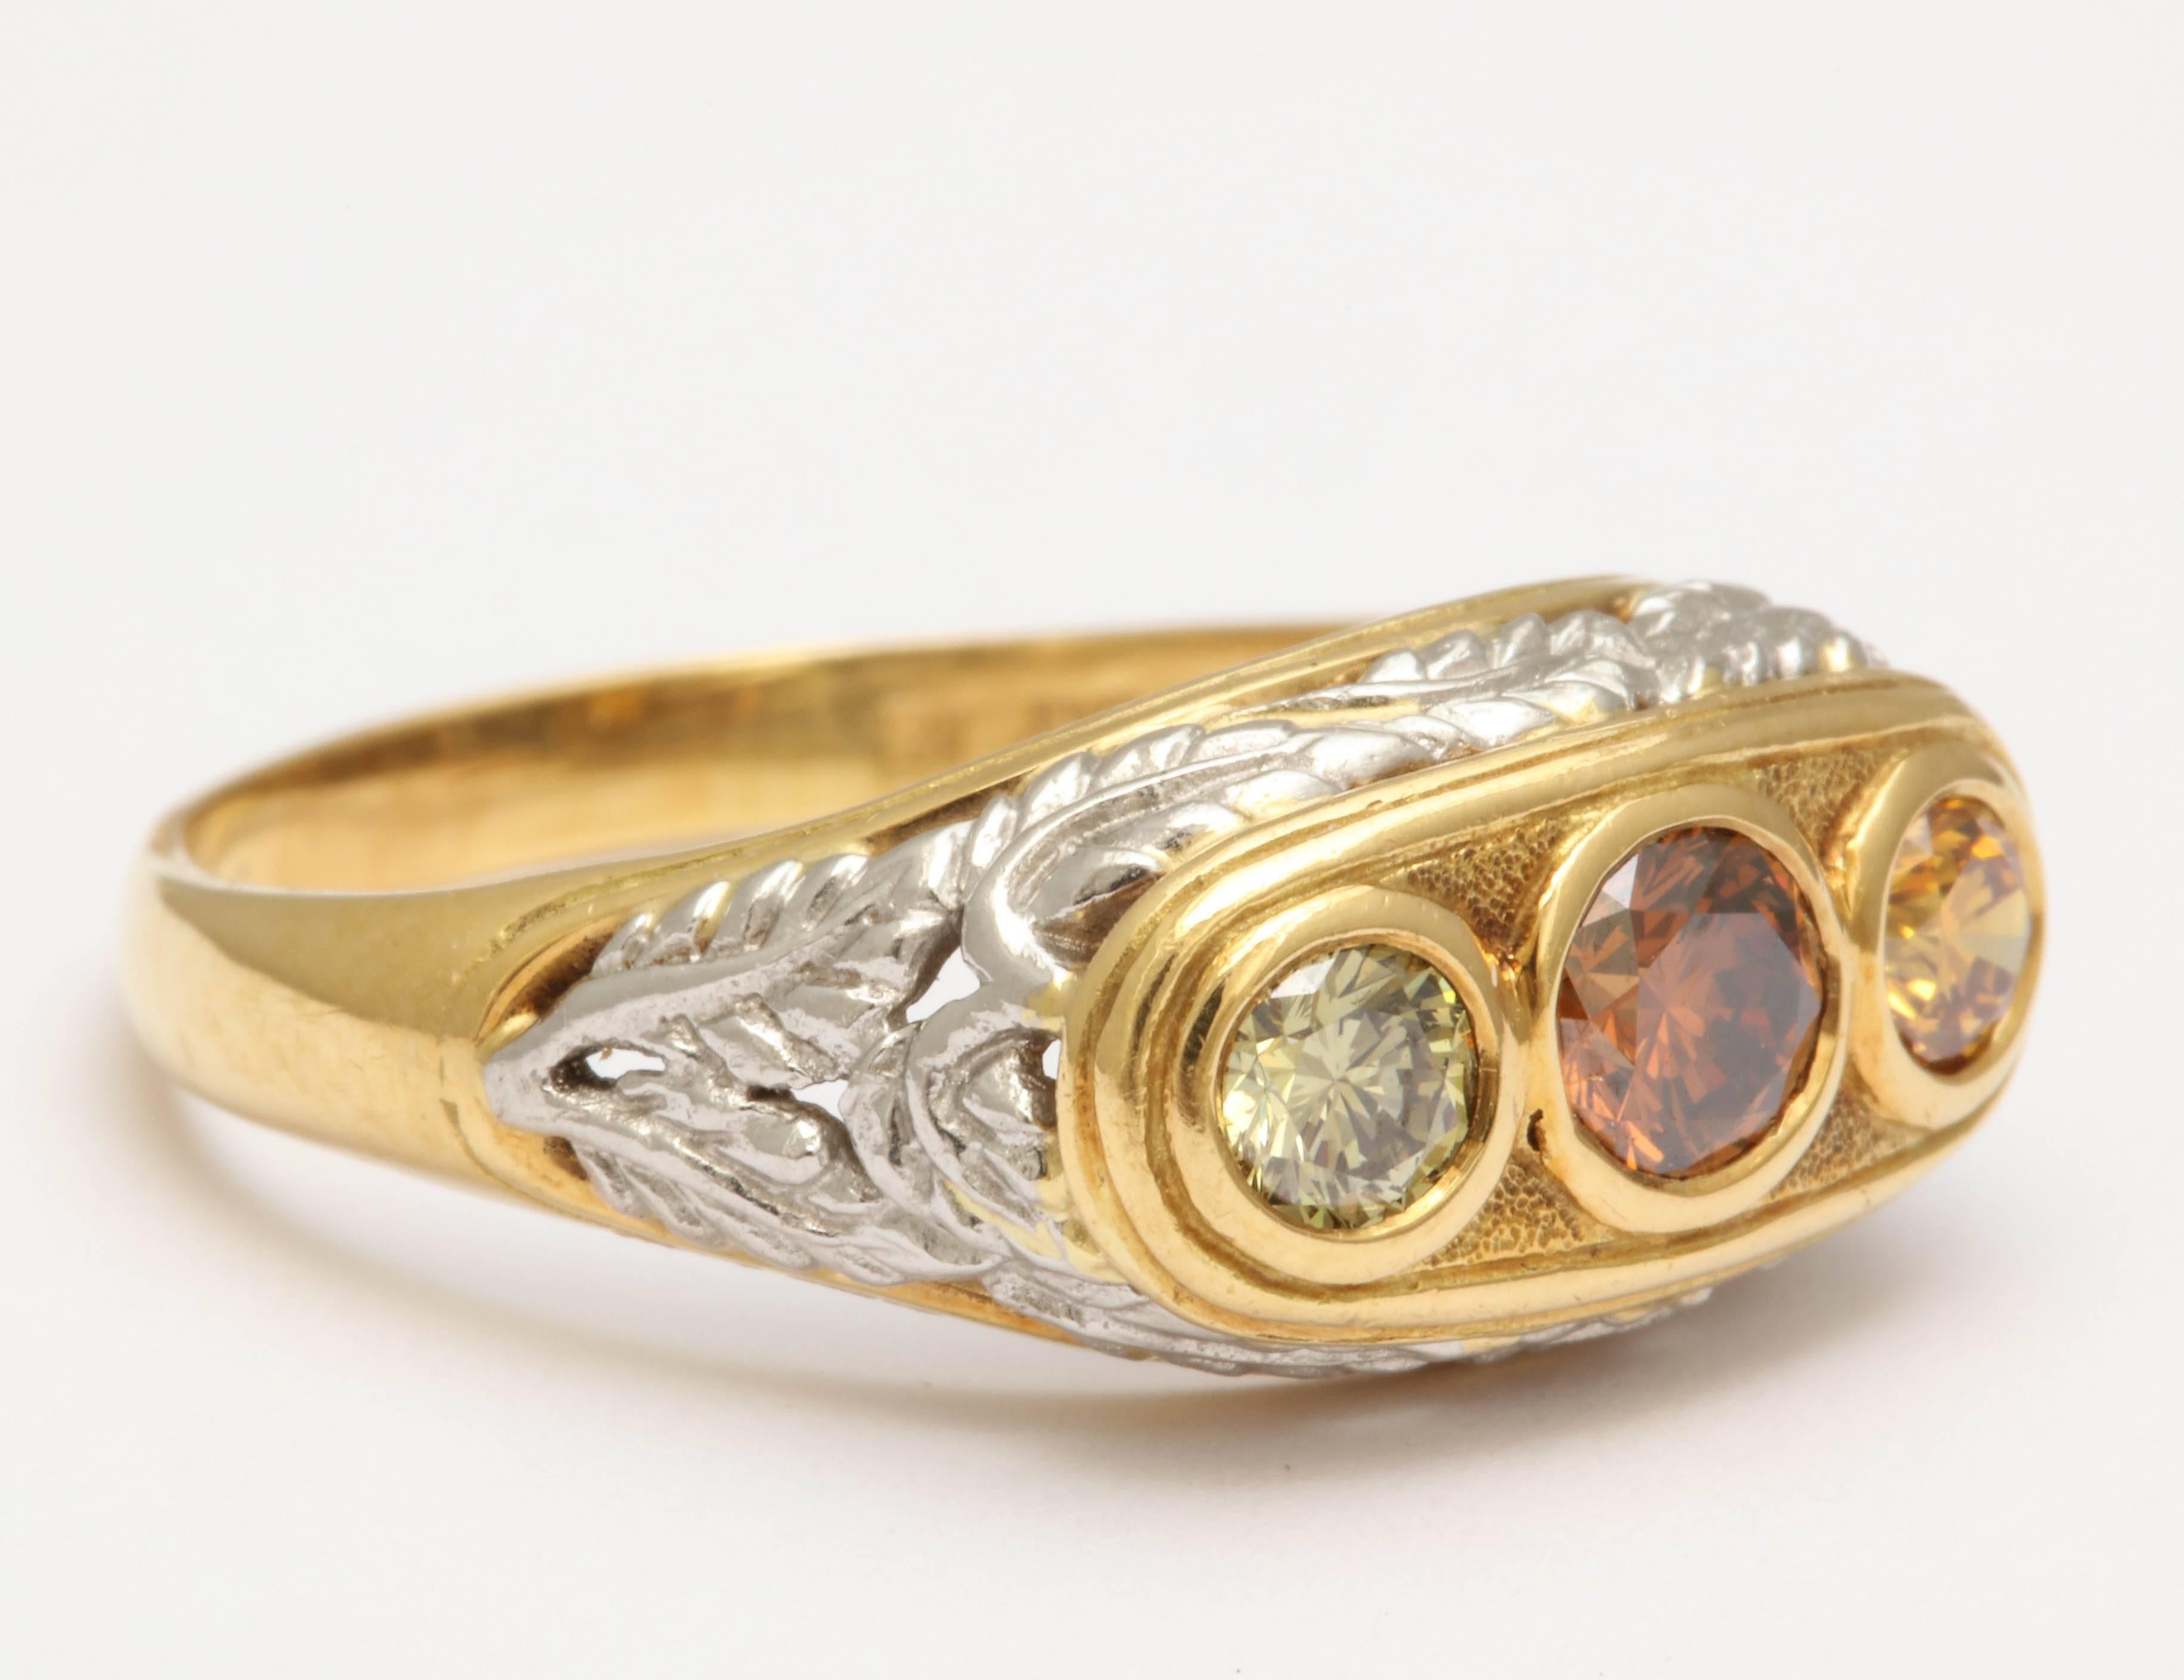 This 18Kt yellow gold hand made, one of a kind,mounting with platinum leaf design. The ring holds a .42 ct orange-brown diamond with a .30ct yellow- green diamond on one side and a .32 ct yellow-orange on the other side. The diamonds are not treated